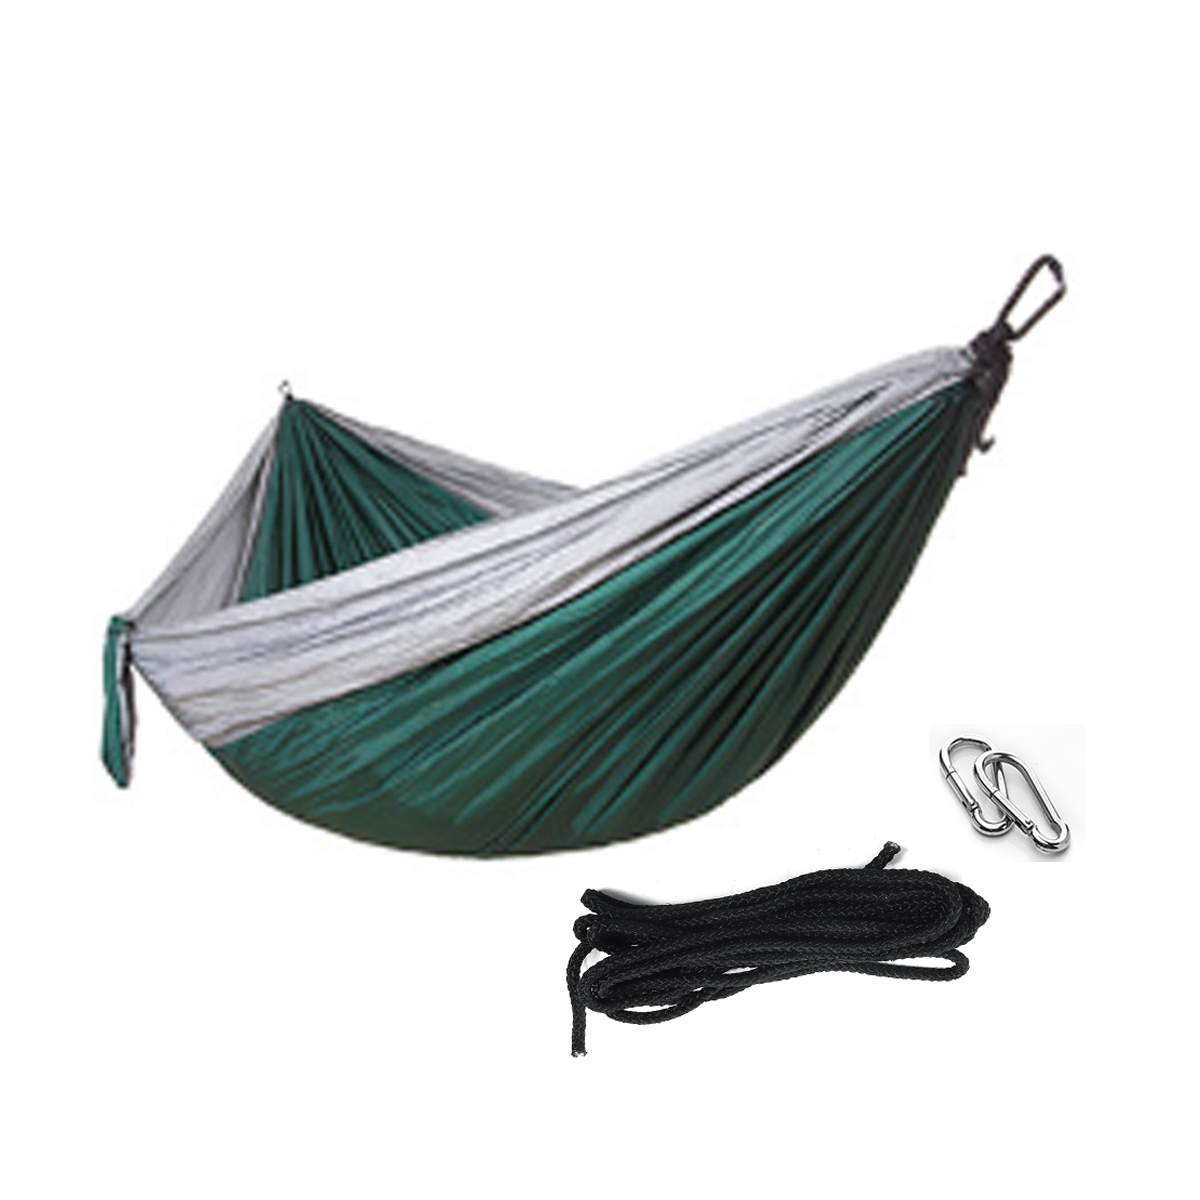 Outdoor-Travel-Double-Person-Hanging-Hammock-Max-Load-200KG-Portable-Camping-Hammock-Bed-1514882-3